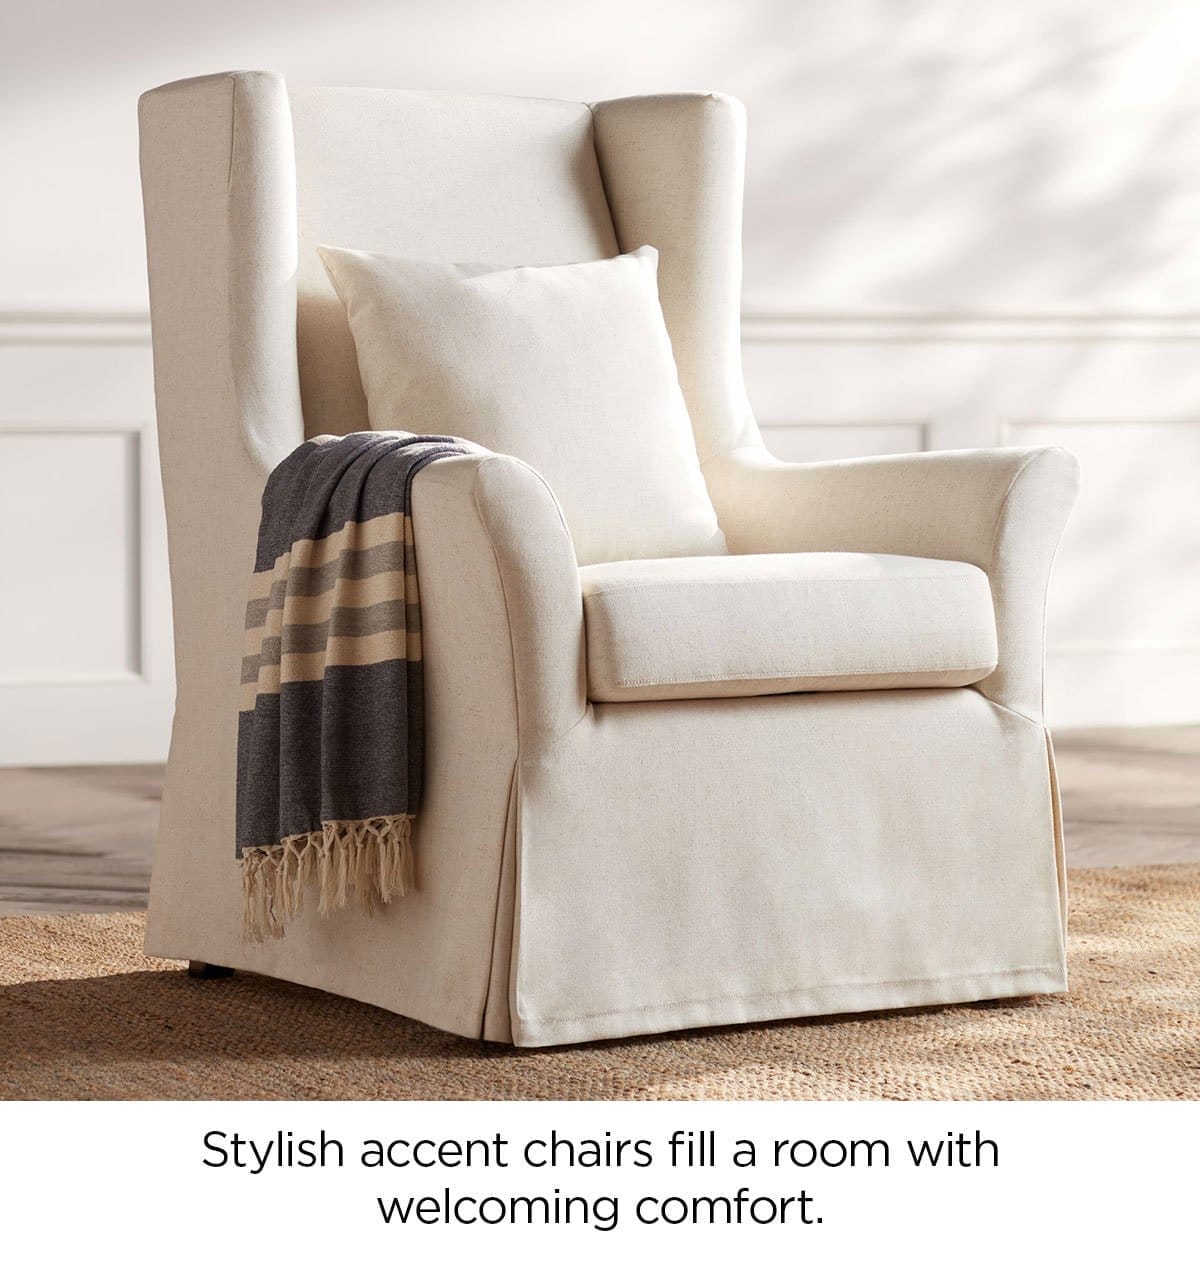 Stylish accent chairs fill a room with welcoming comfort.